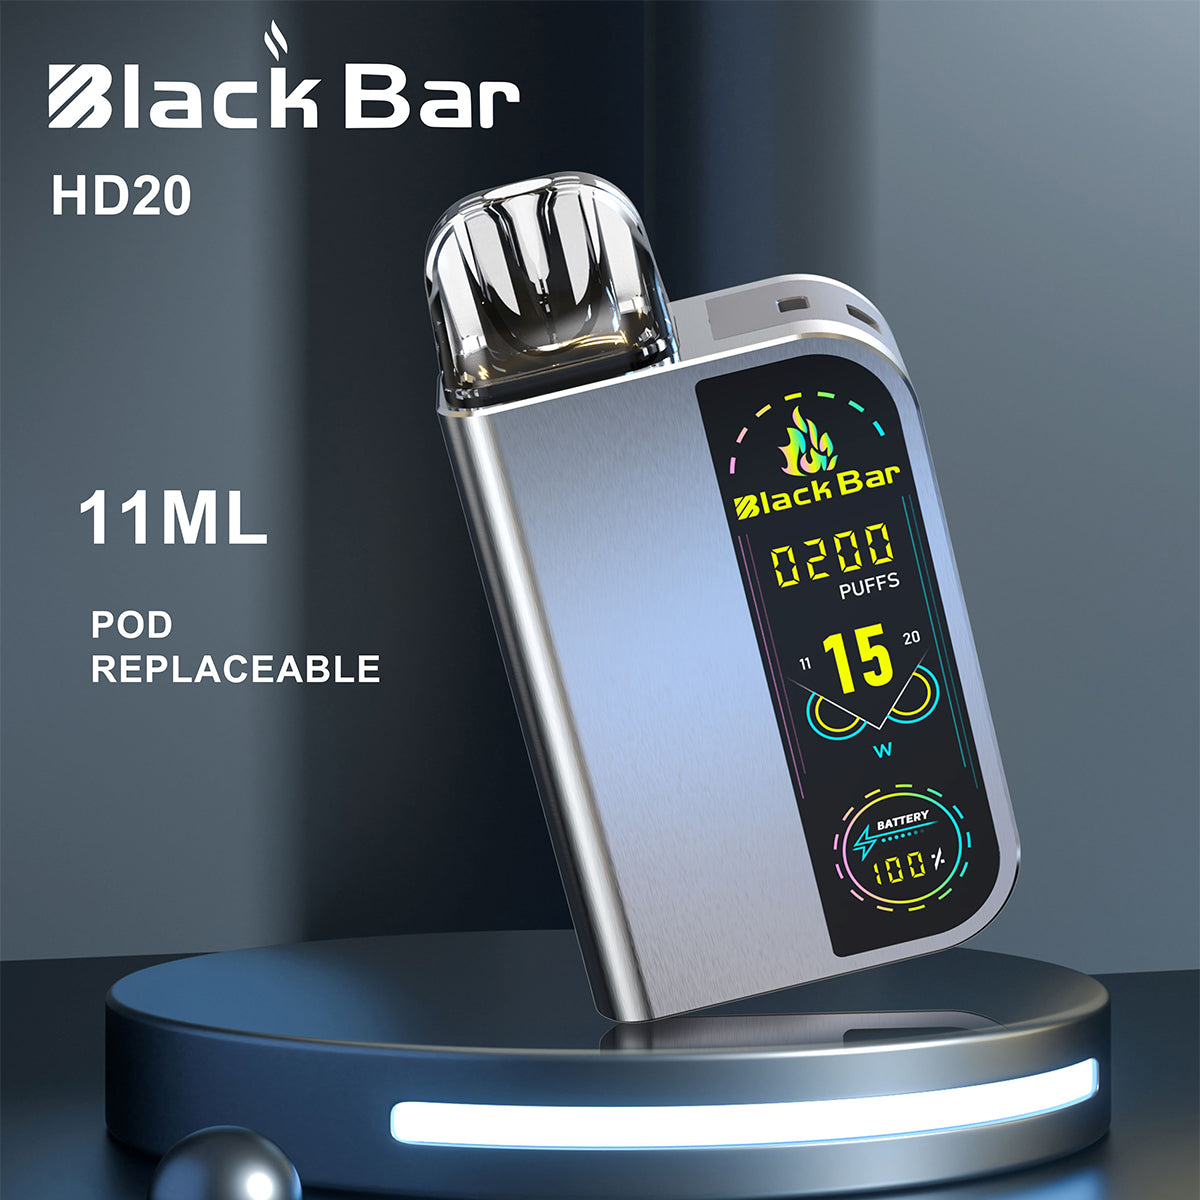 HD20-11ml oil-filled style Pod replaceable airflow adjustable airflow adjustable battery changeable